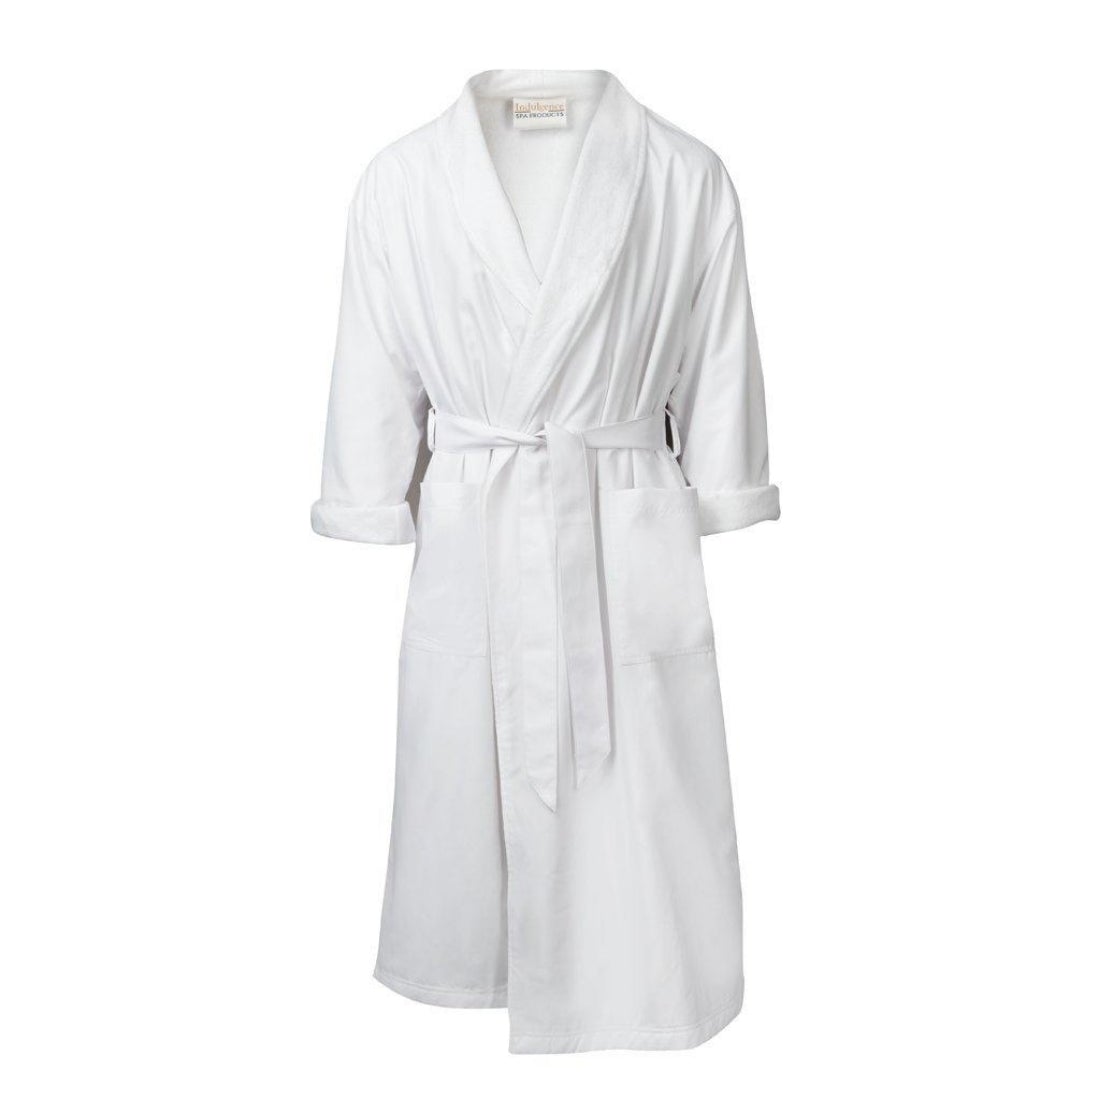 Robe - Dual-Layer Microfiber (Unisex) in White-ONE SIZE FITS ALL